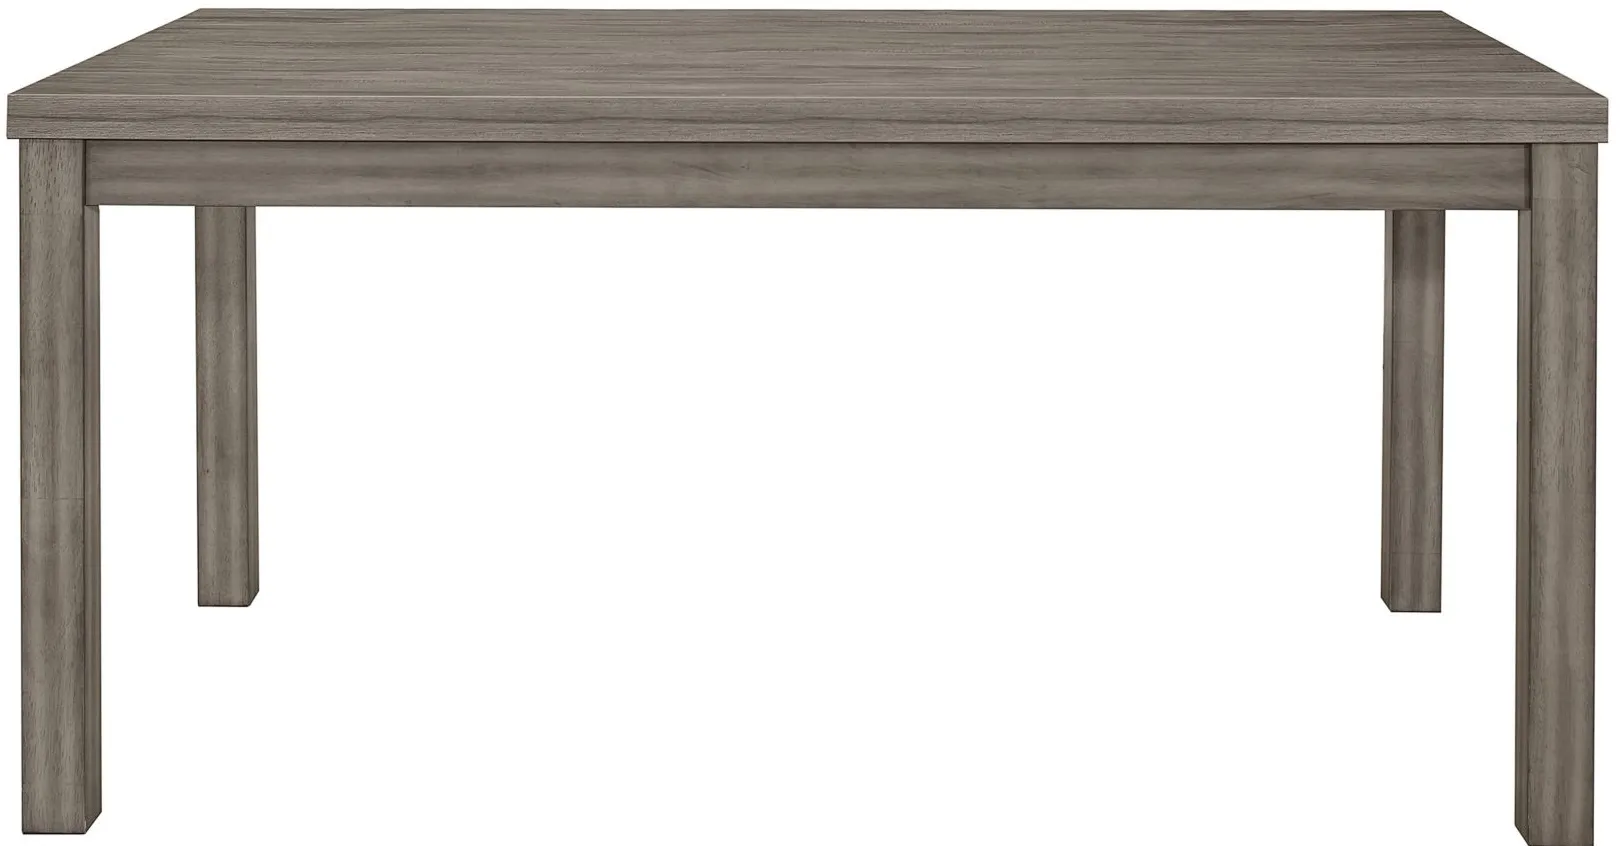 Simone Dining Room Table in Weathered Gray by Homelegance